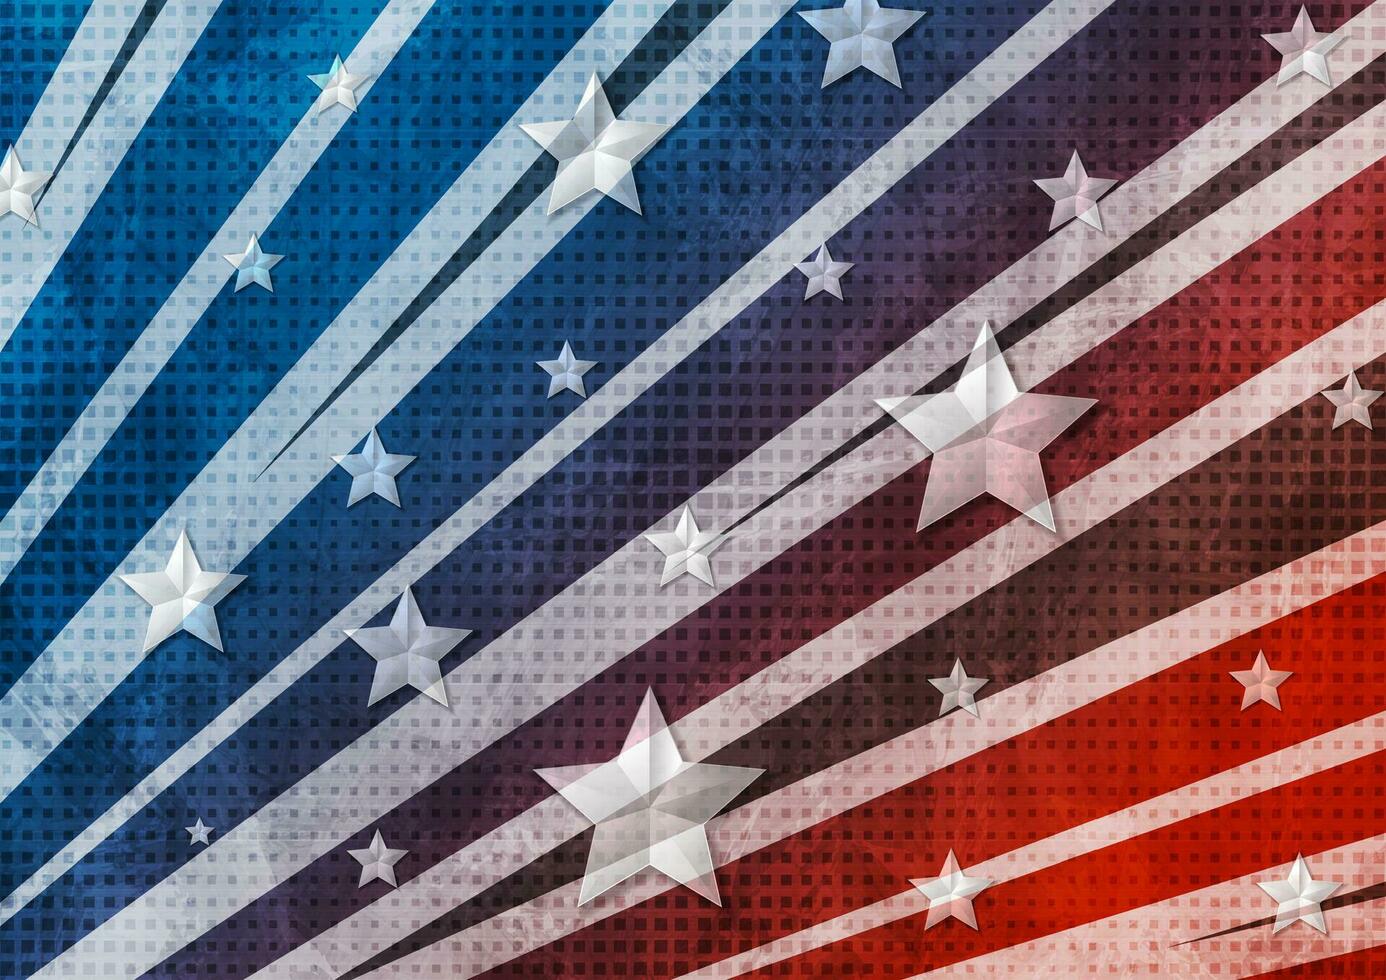 Grunge concept USA flag abstract background vector